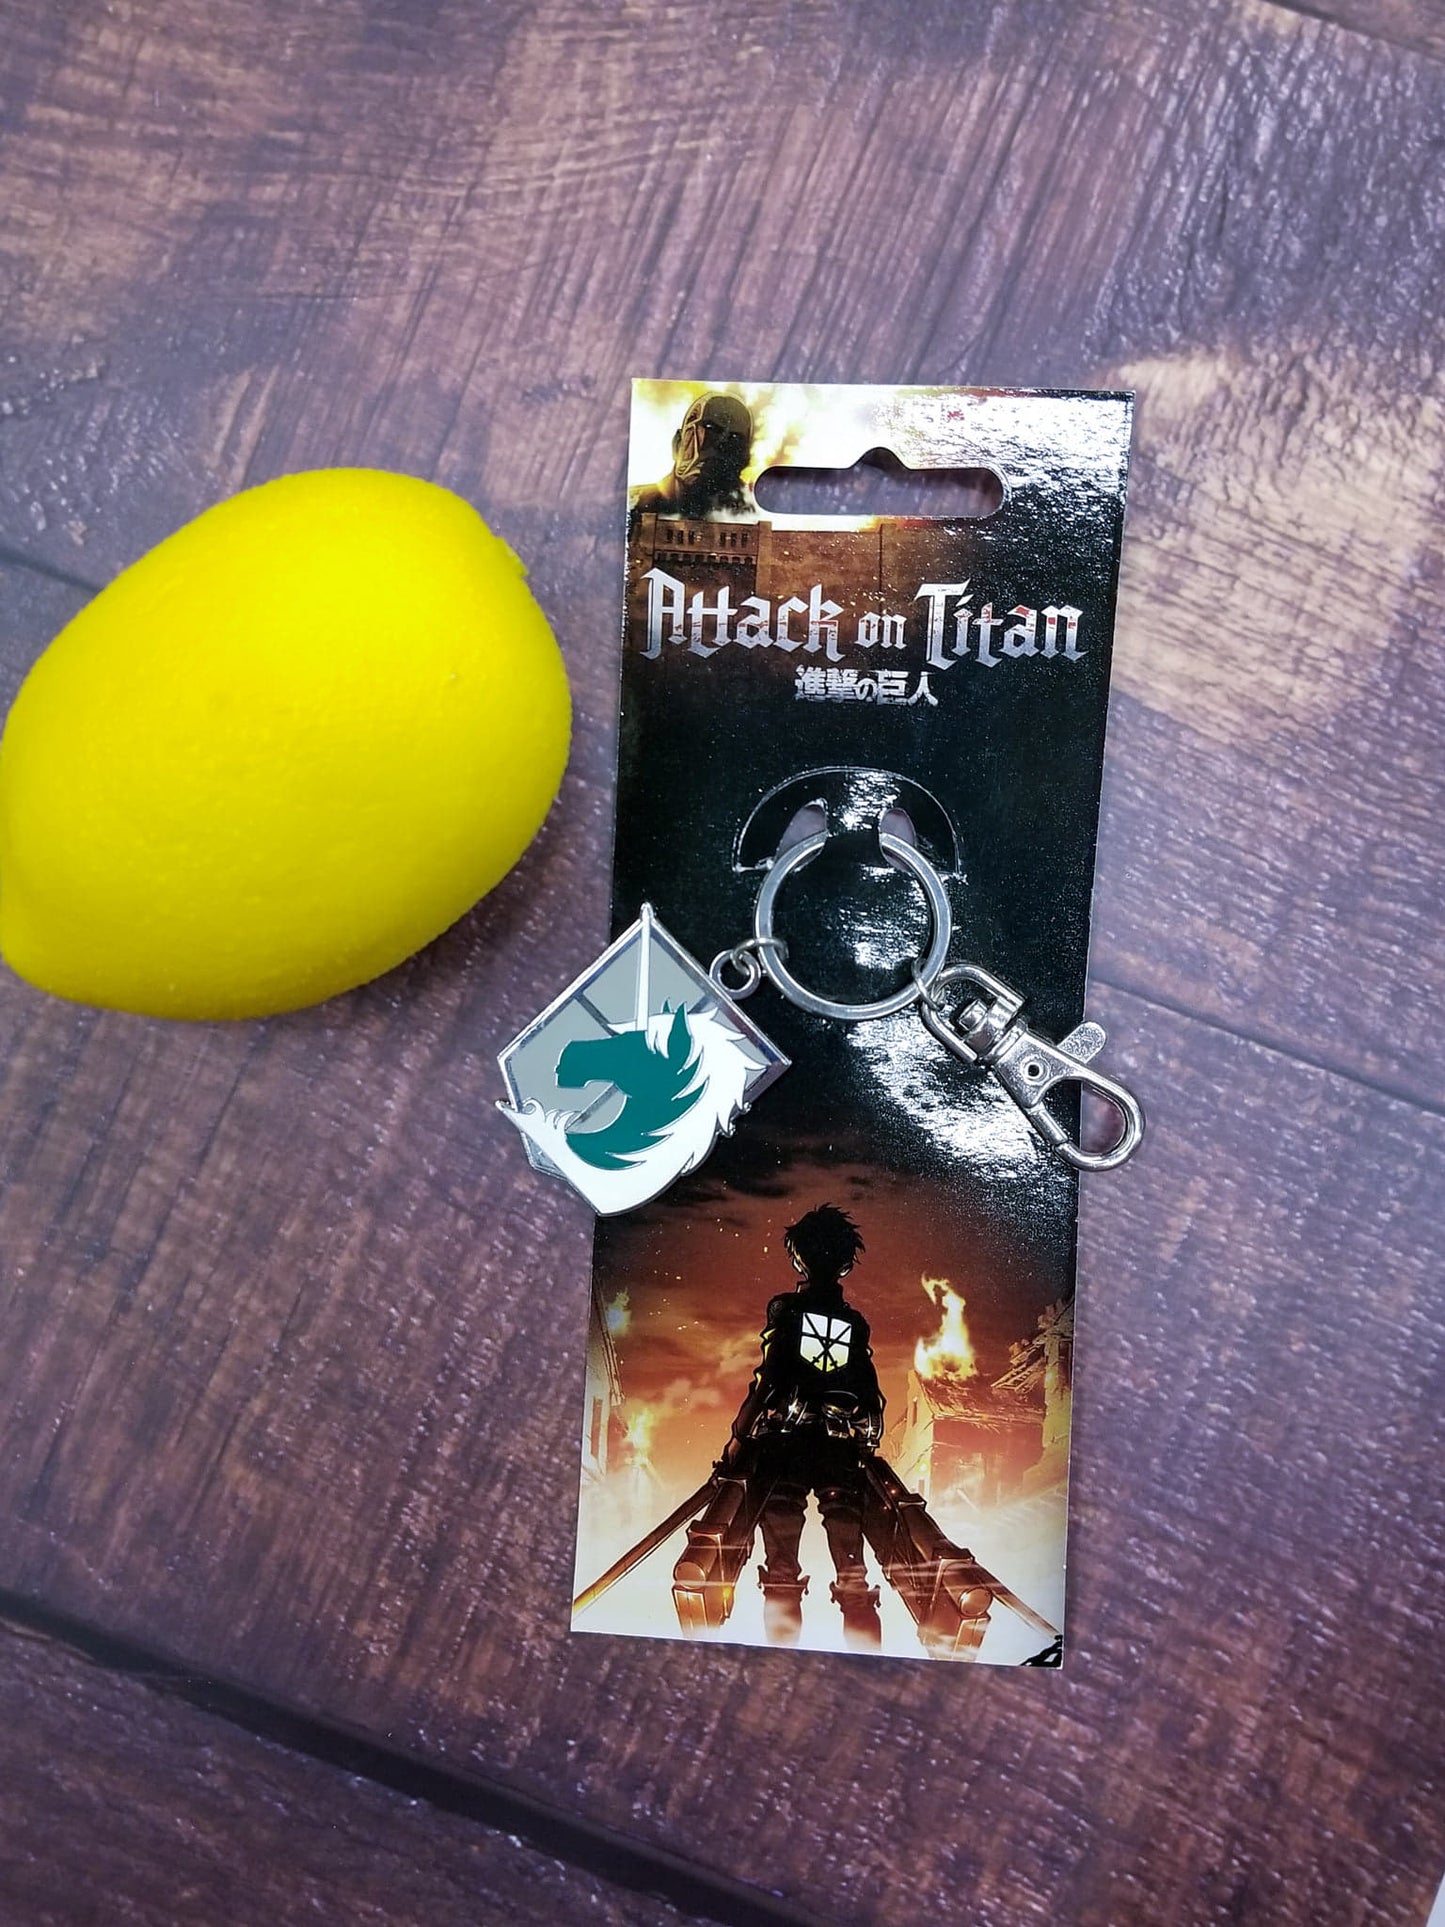 An enameled metal keychain with clip and ring, depicting the Military Police Brigade emblem from Attack on Titan.  The metal emblem is approximately 1 inch wide by 1.5 inches tall.